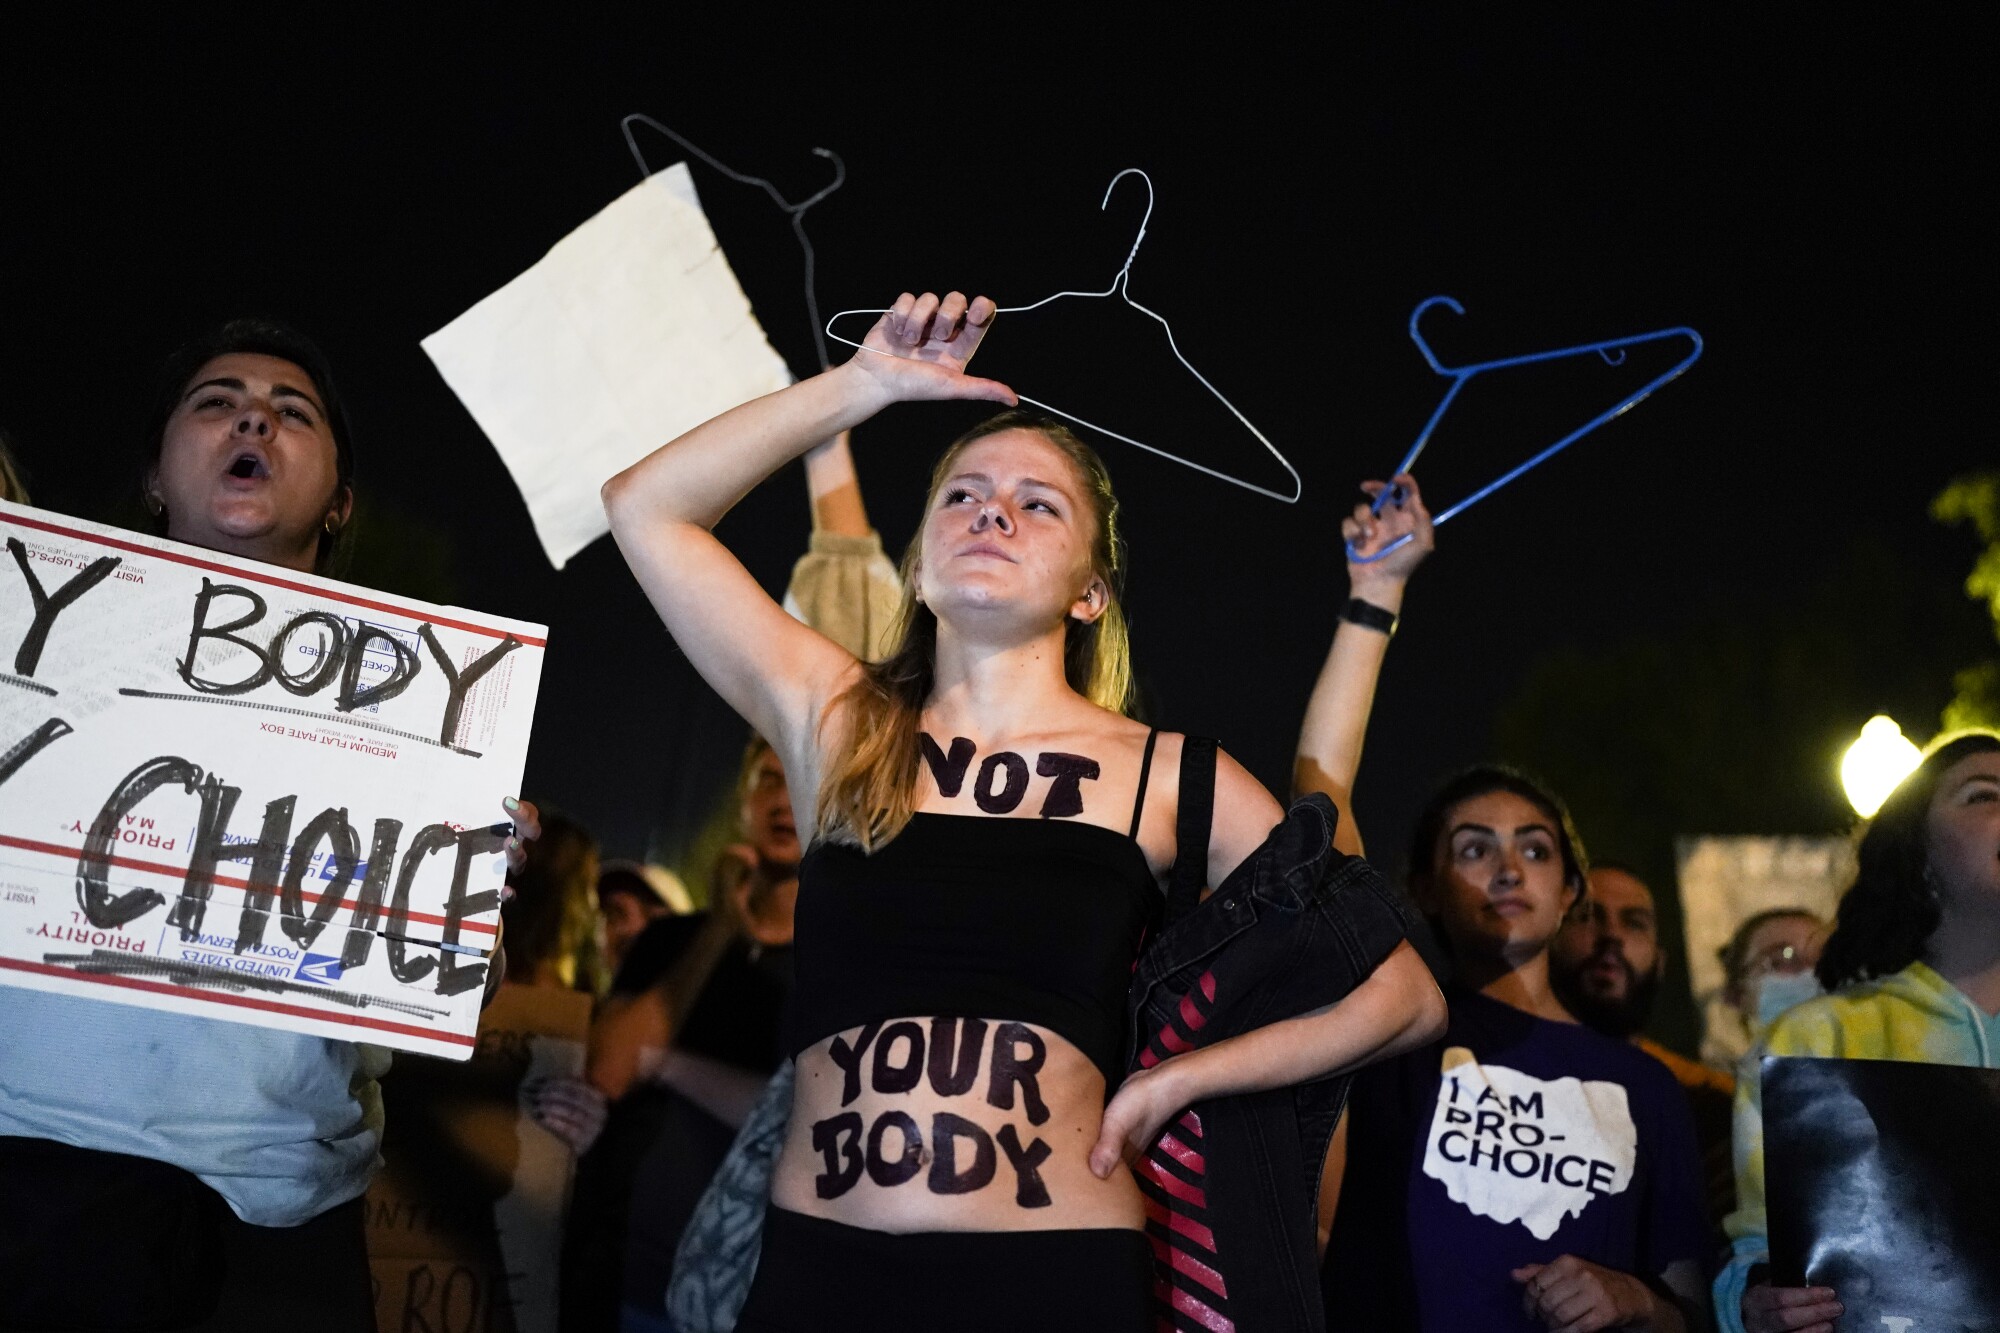 Protesters hold hangers and a woman has the words "Not your body" written on his bust.